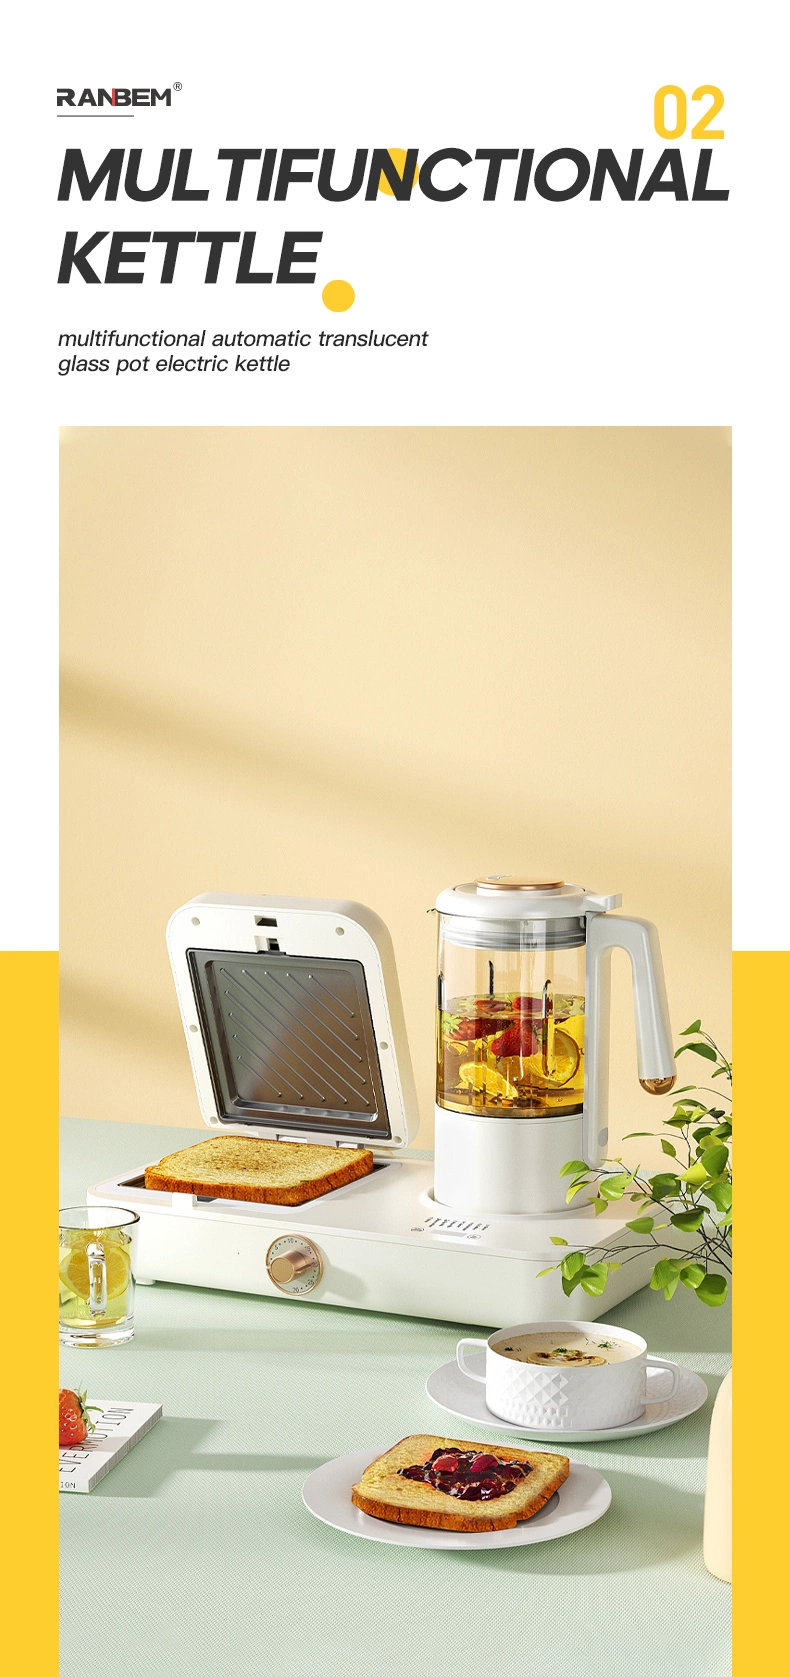 Machine Home Makers in 3 1 High Quality Healthy Egg Three One Multifunctional Waffle Sandwich Breakfast Maker for Sale